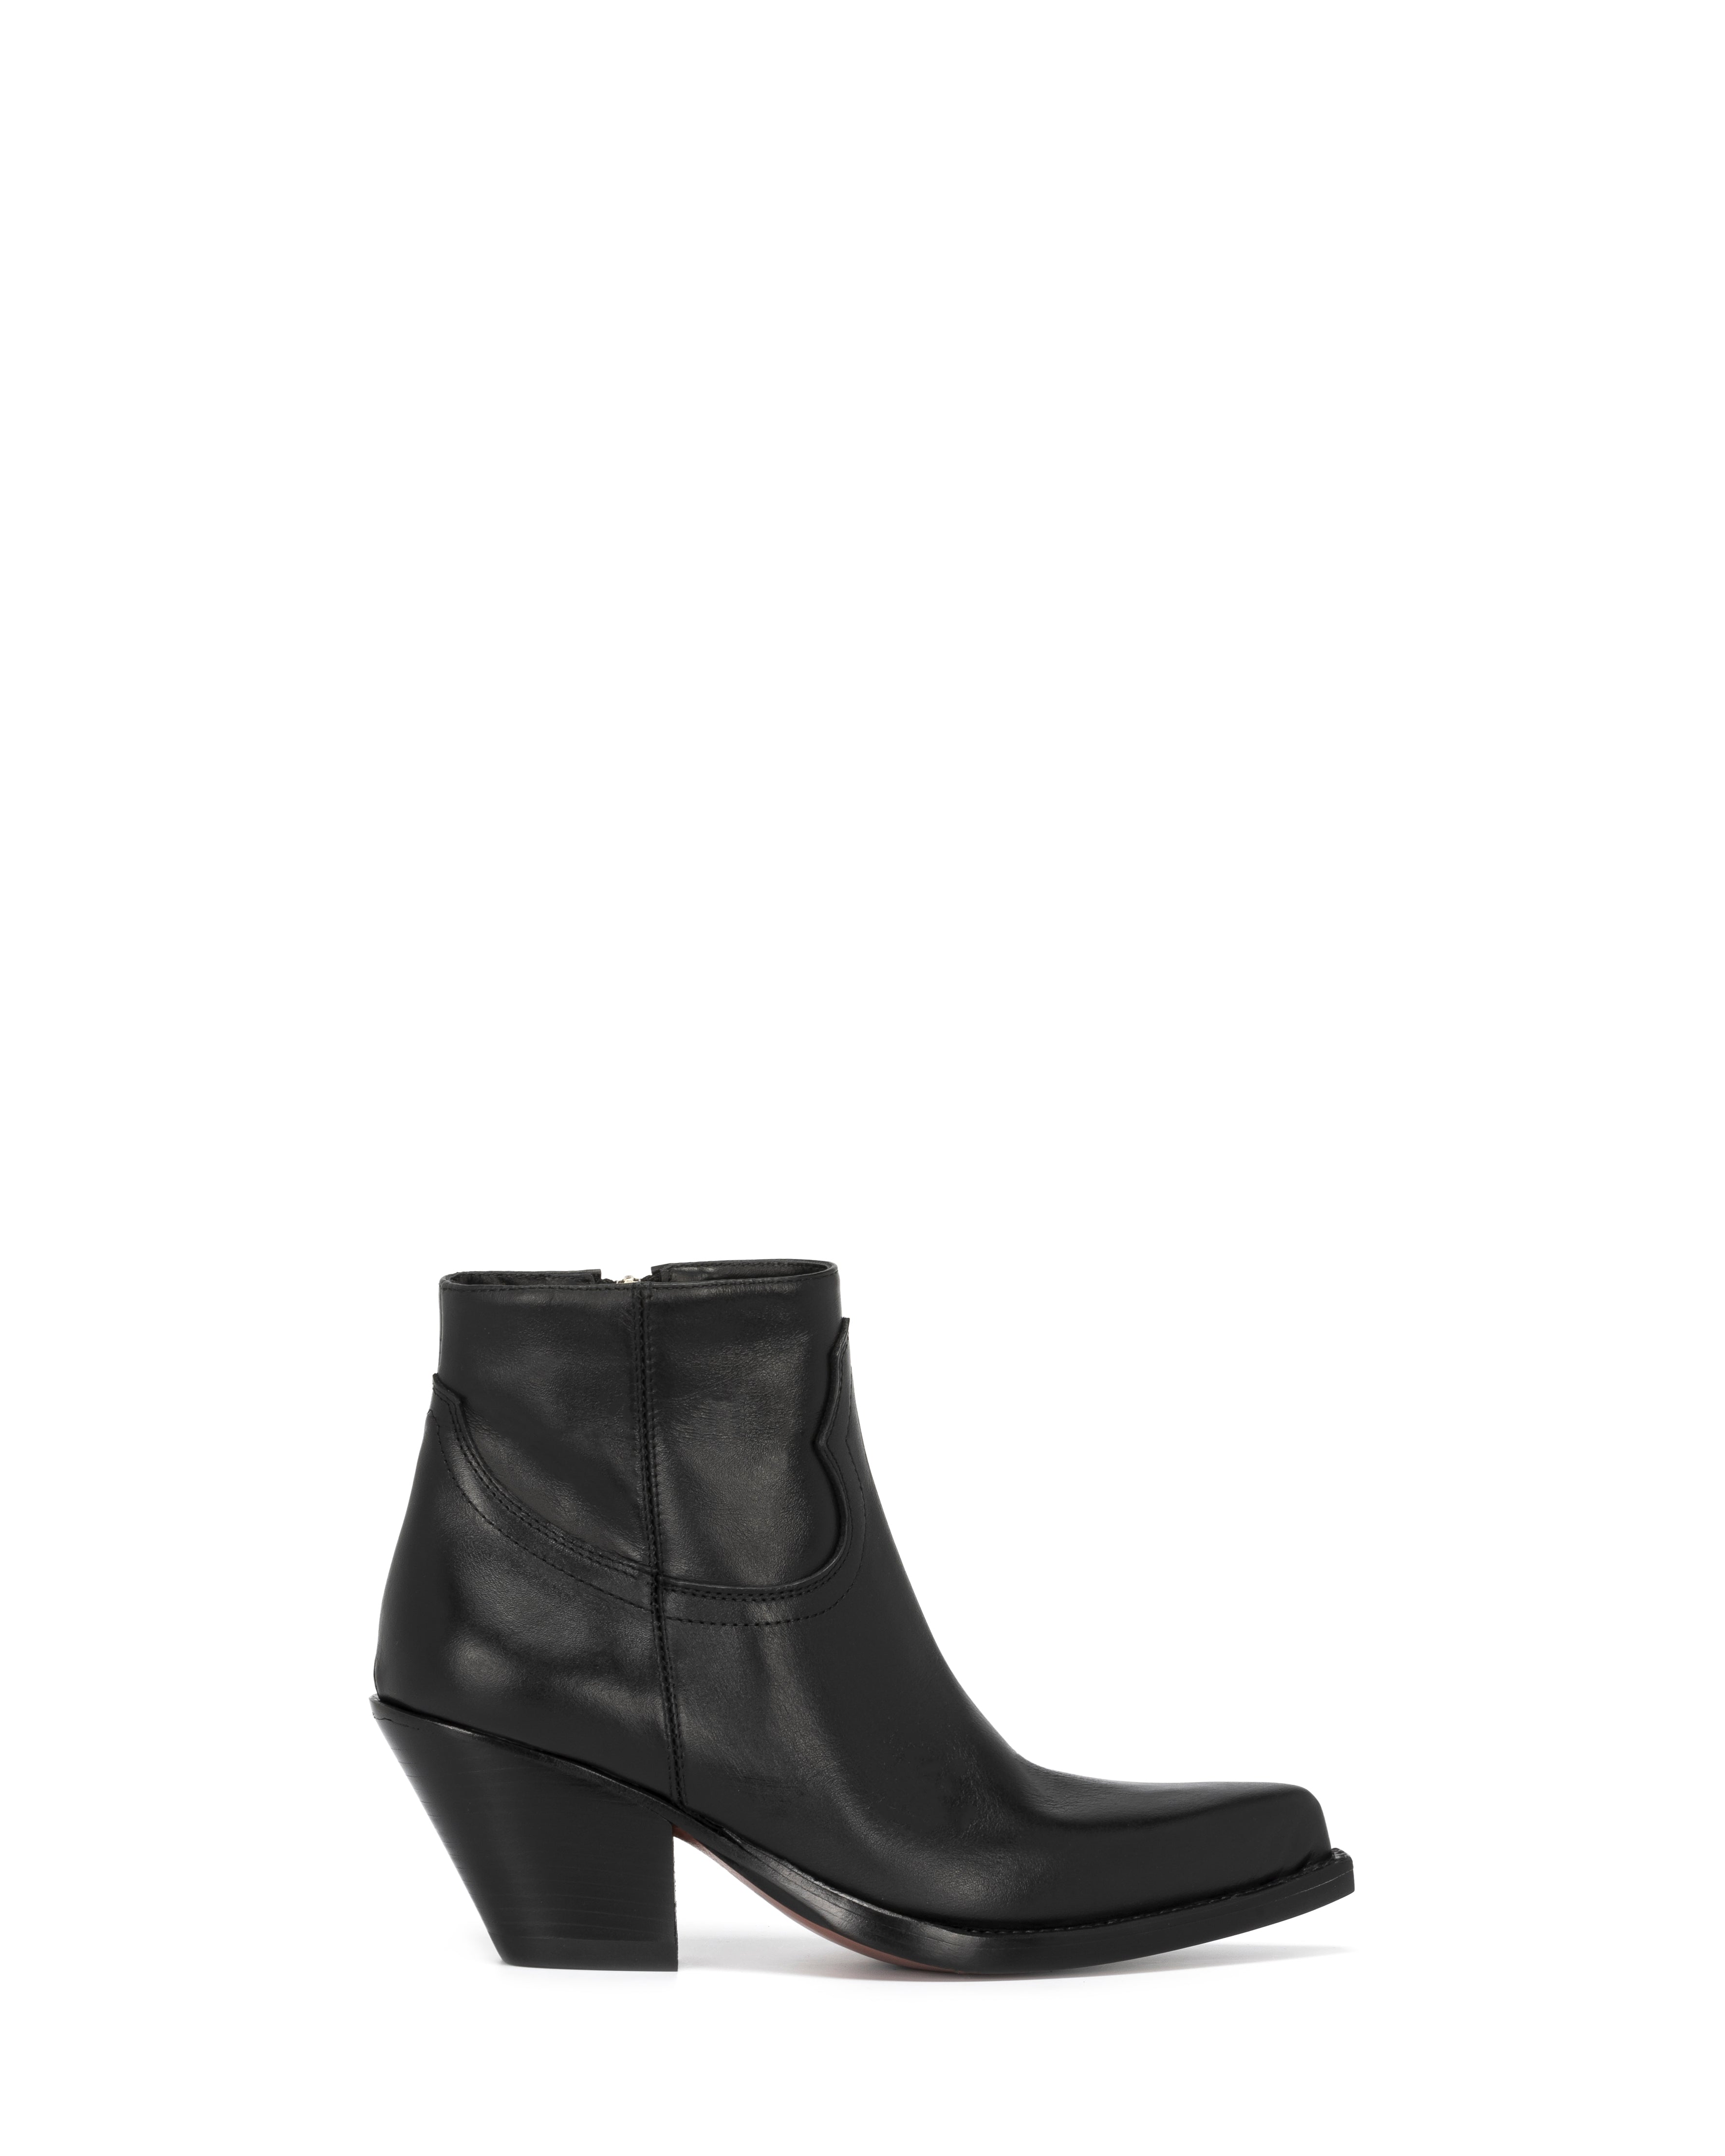 Jalapeno Ankle Boots